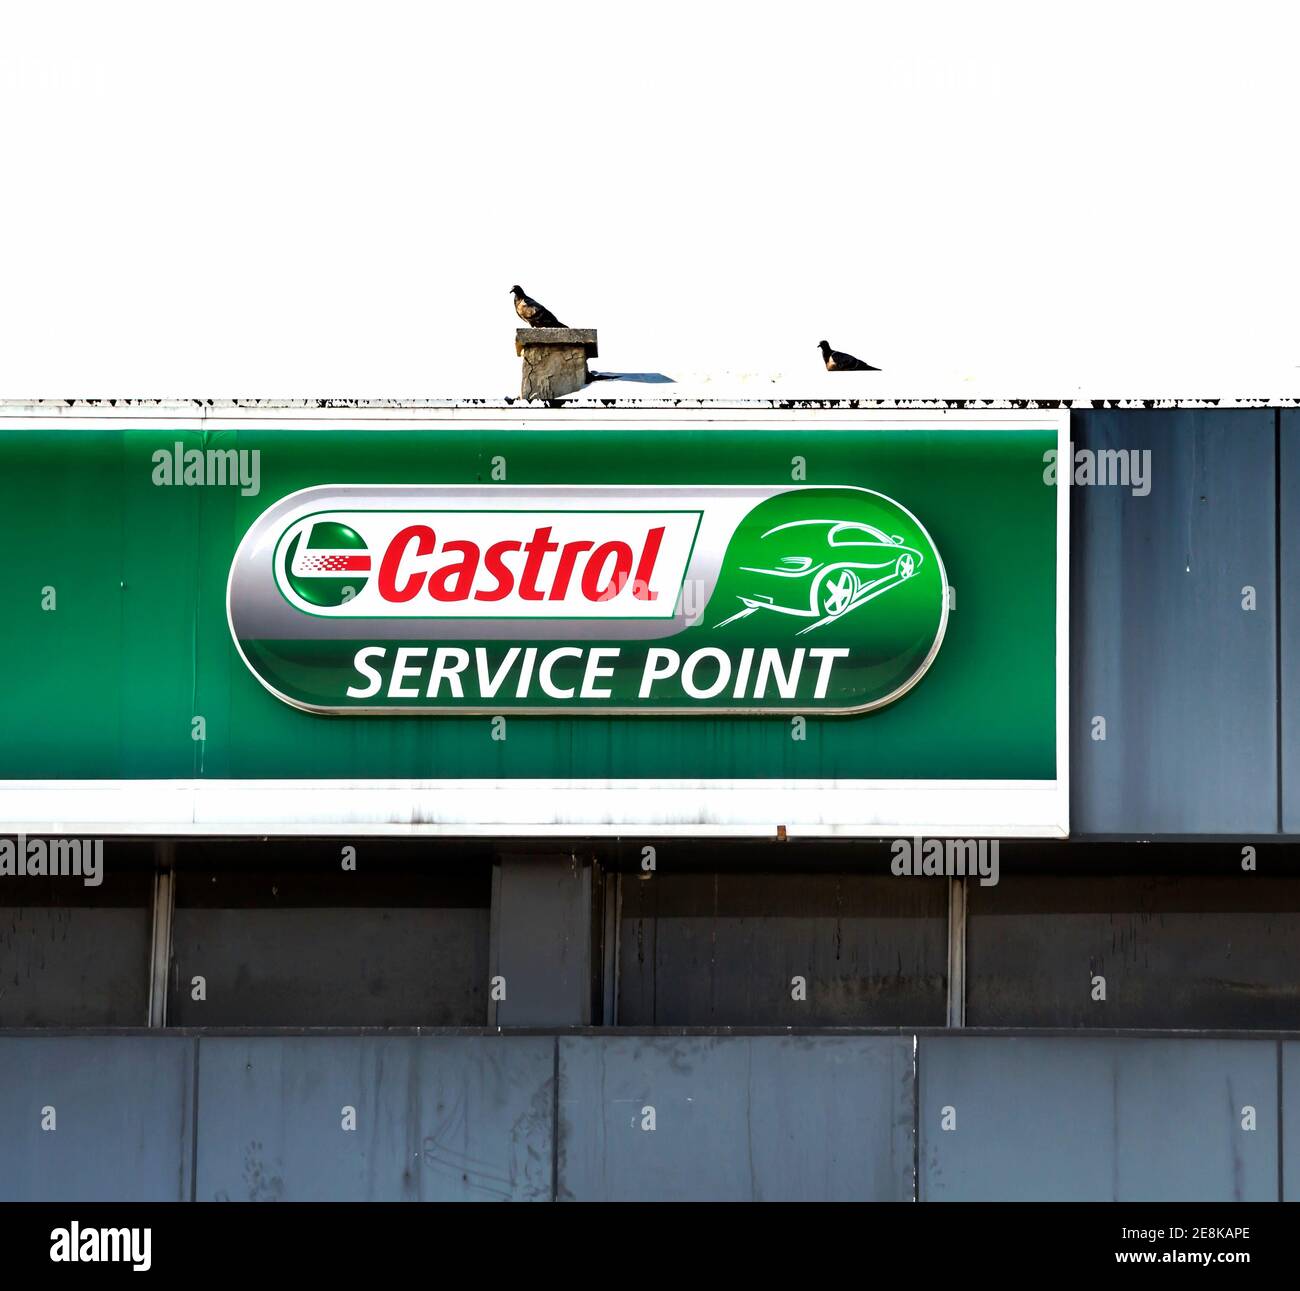 Castrol service point. Castrol is a British global brand of industrial and automotive lubricants offering a wide range of oils and greases Stock Photo